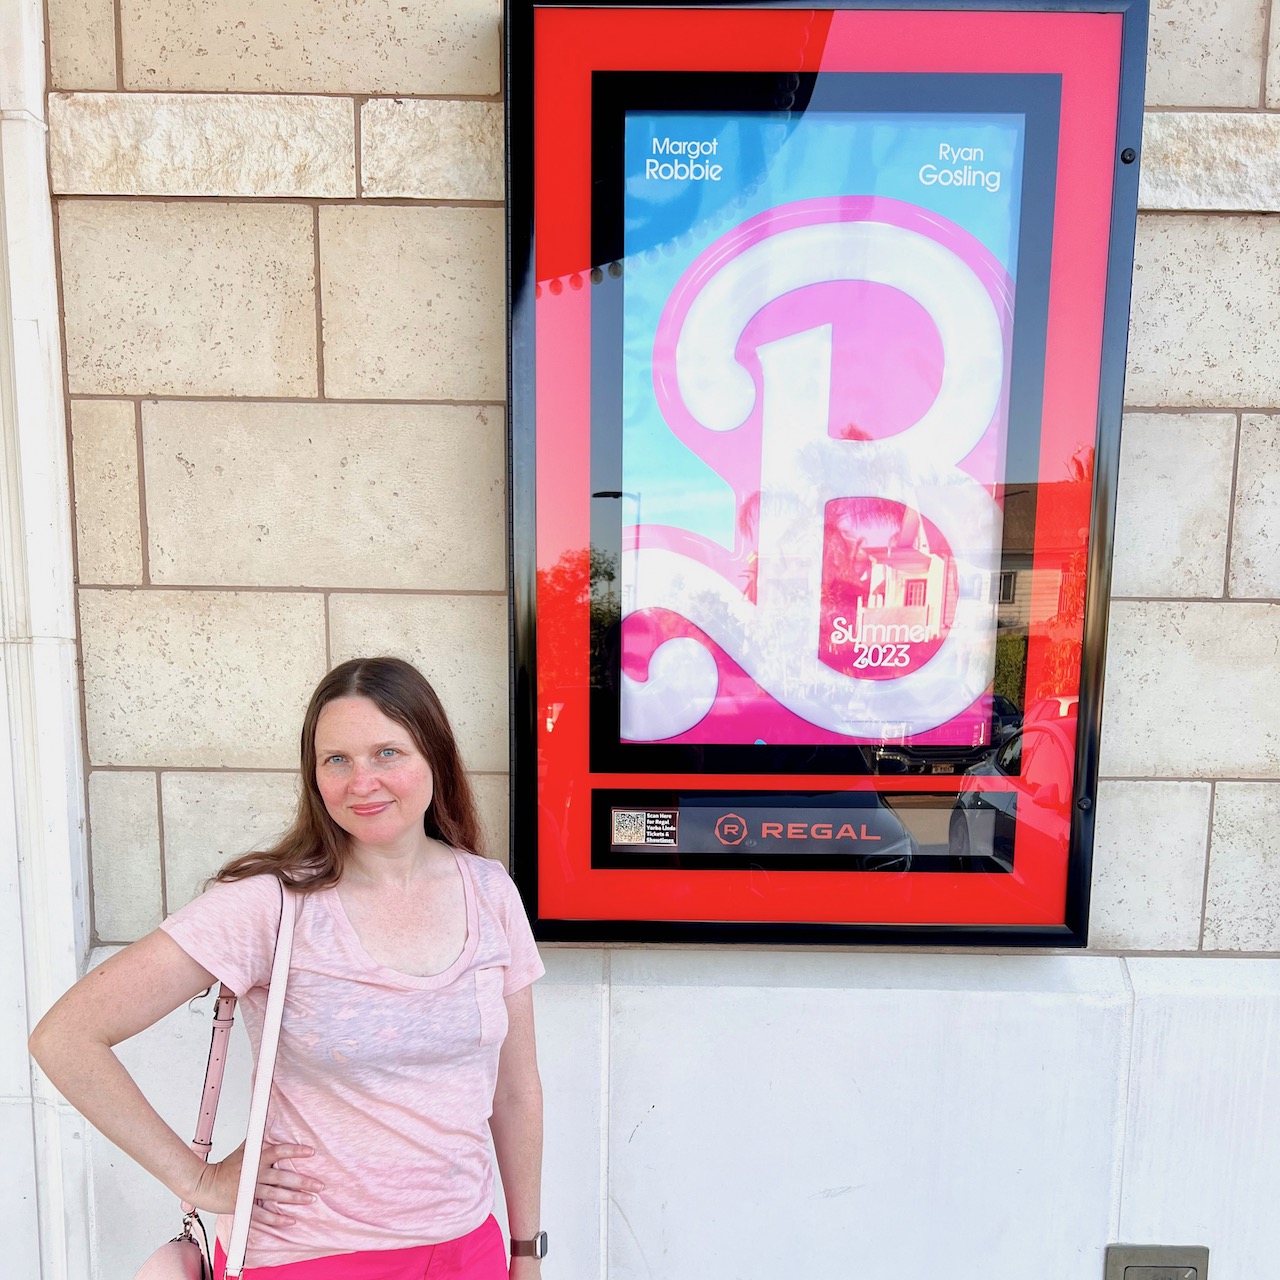 Shannon standing in front of the poster for the Barbie movie. Shannon is wearing a light pink shirt with dark pink shorts.